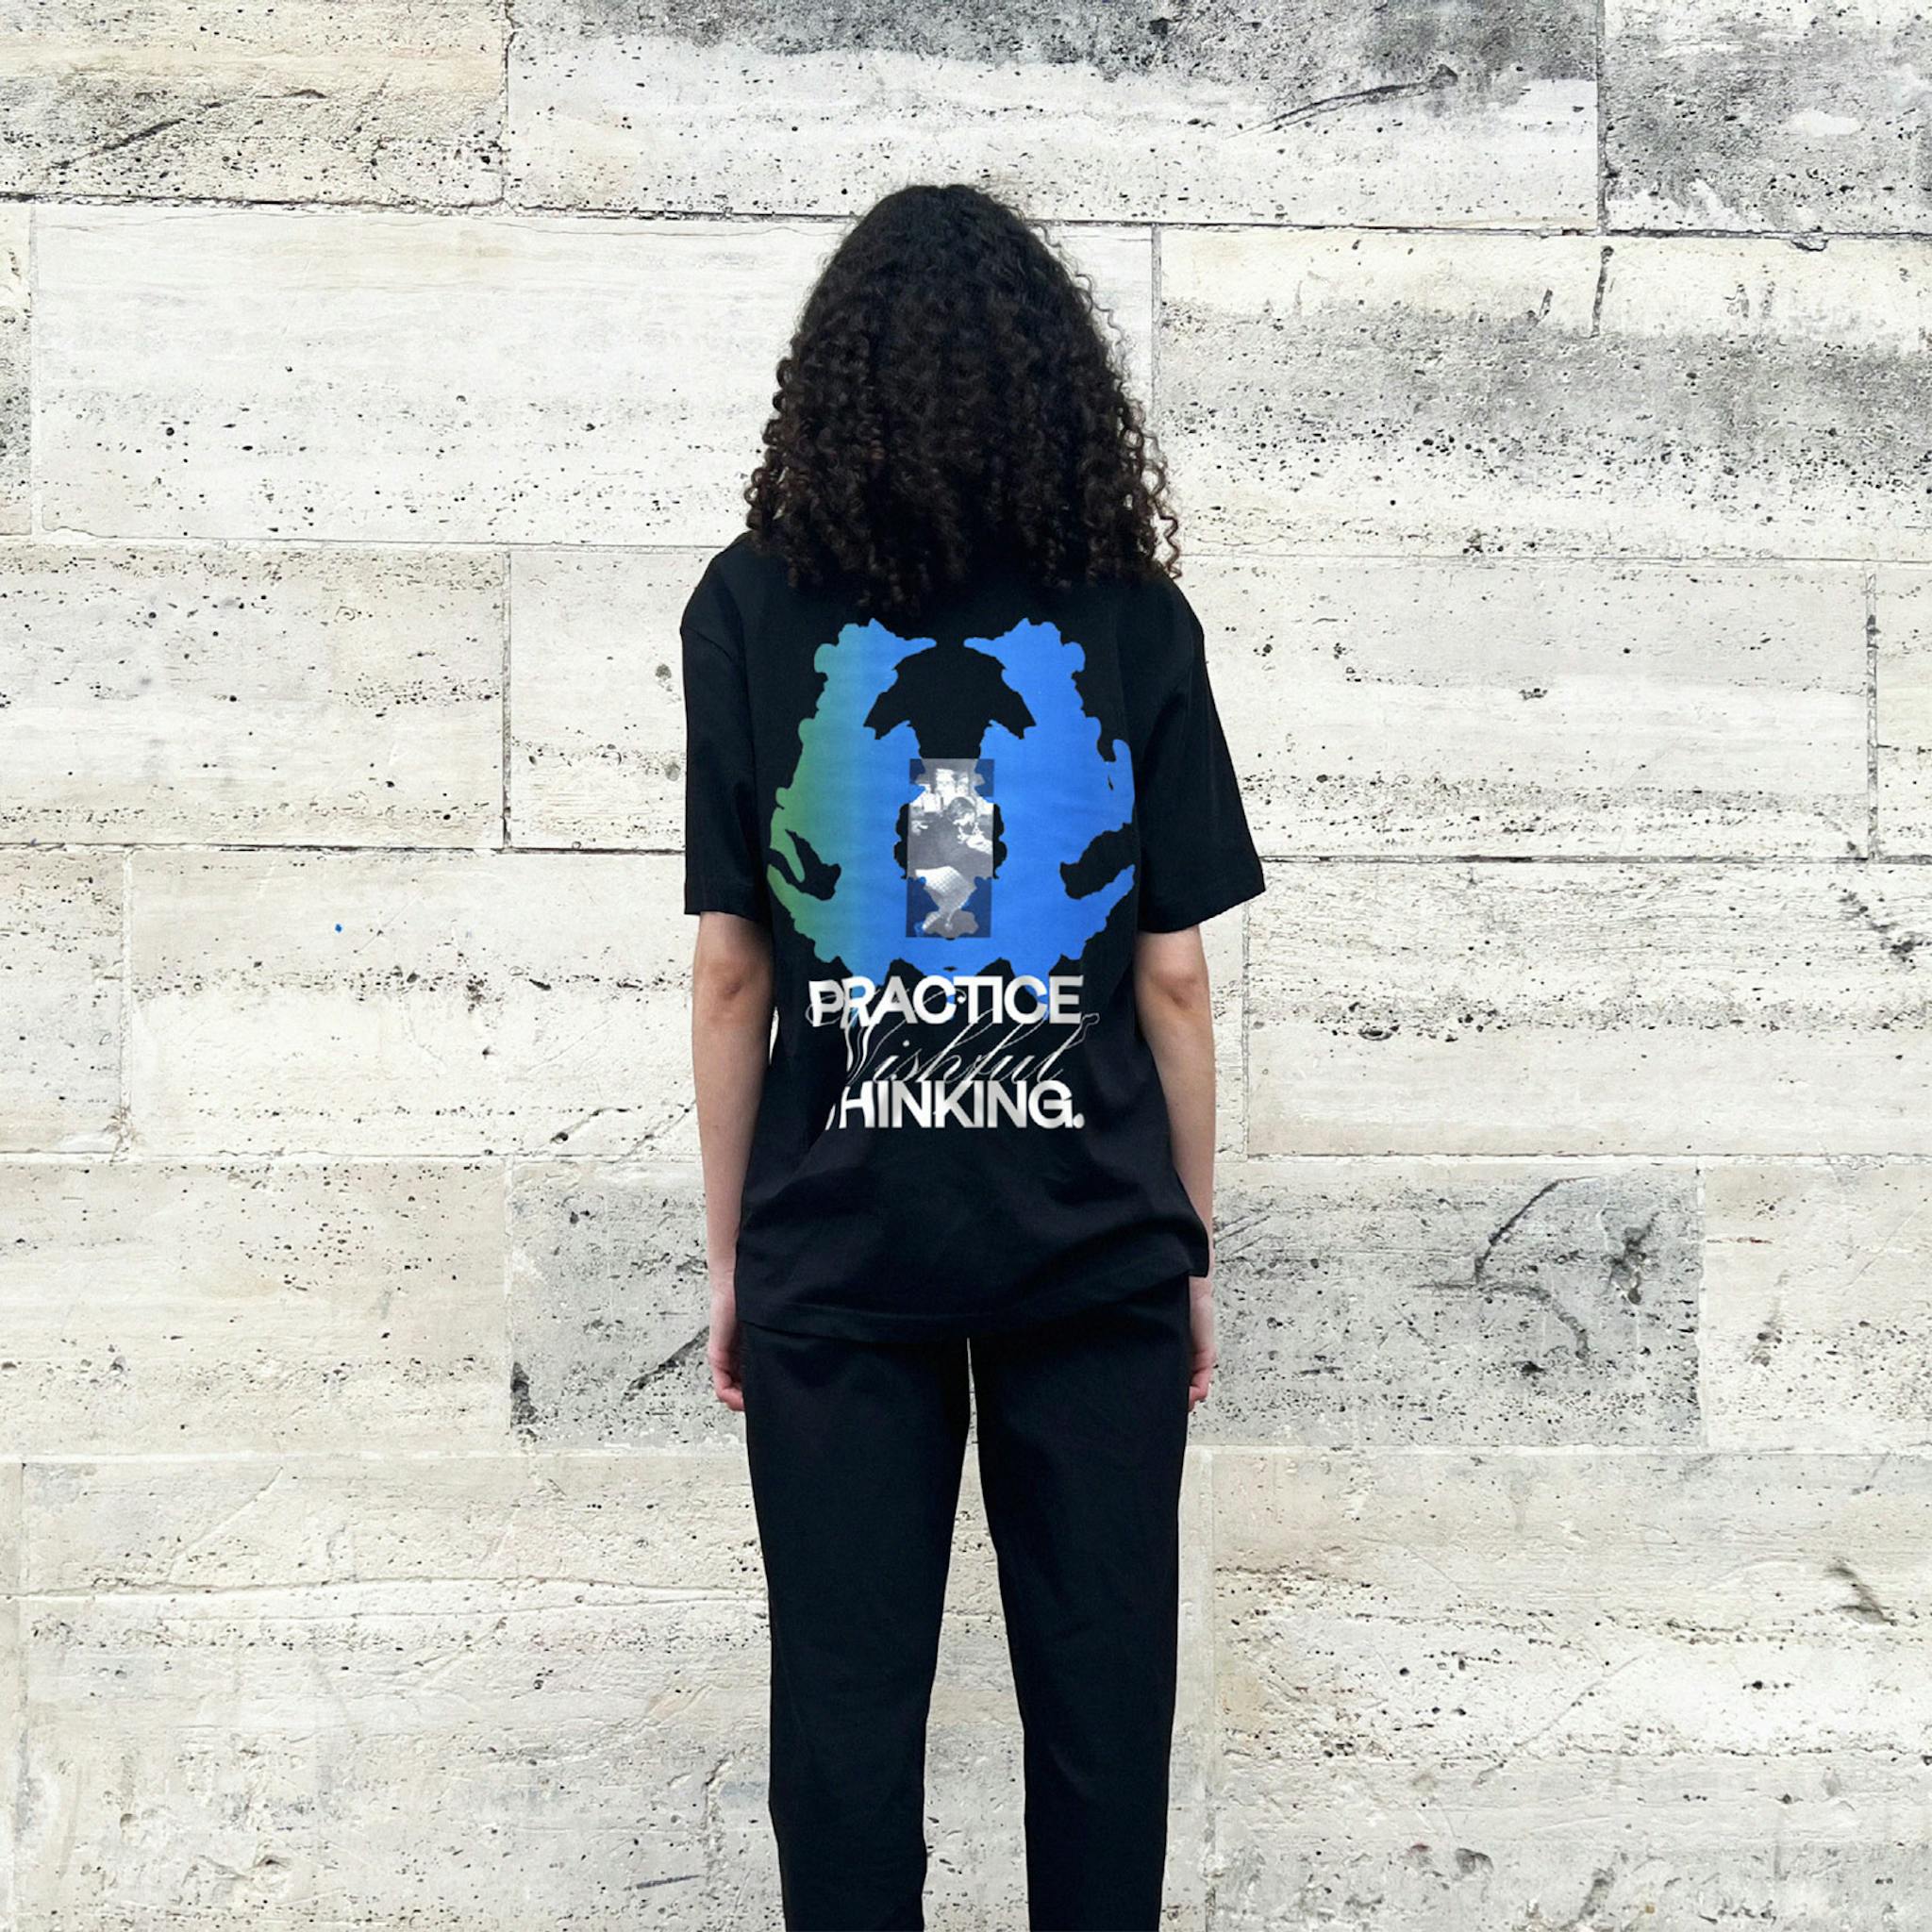 A woman with long dark hair wearing black T-shirt with a large blue and green graphic and text on the back saying "Practice Wishful Thinking"